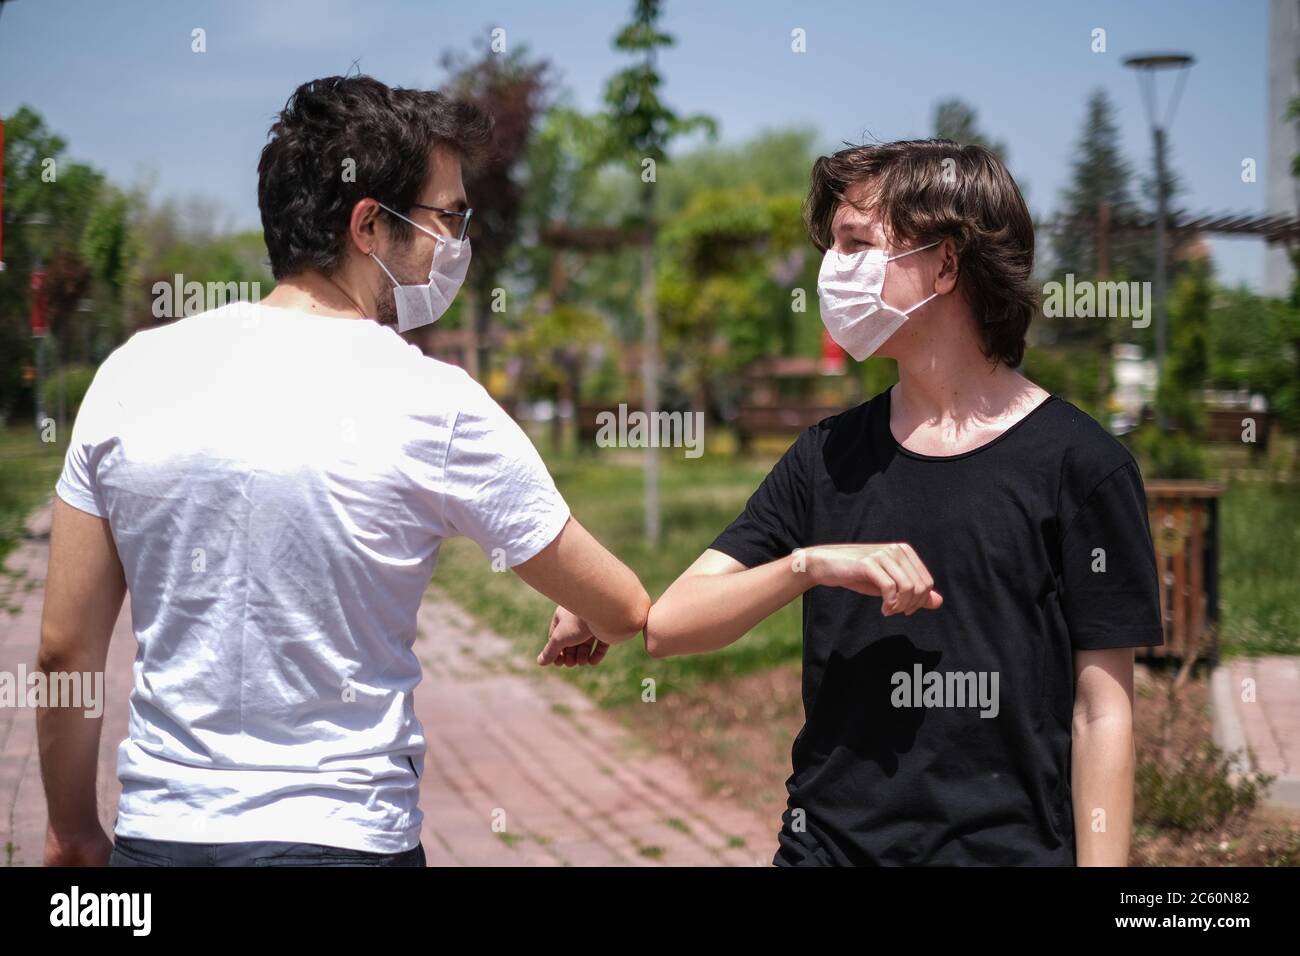 Greeting with elbow in coronavirus epidemic days. New greeting style during coronavirus epidemic. Two friends bump elbows outdoors. Stock Photo